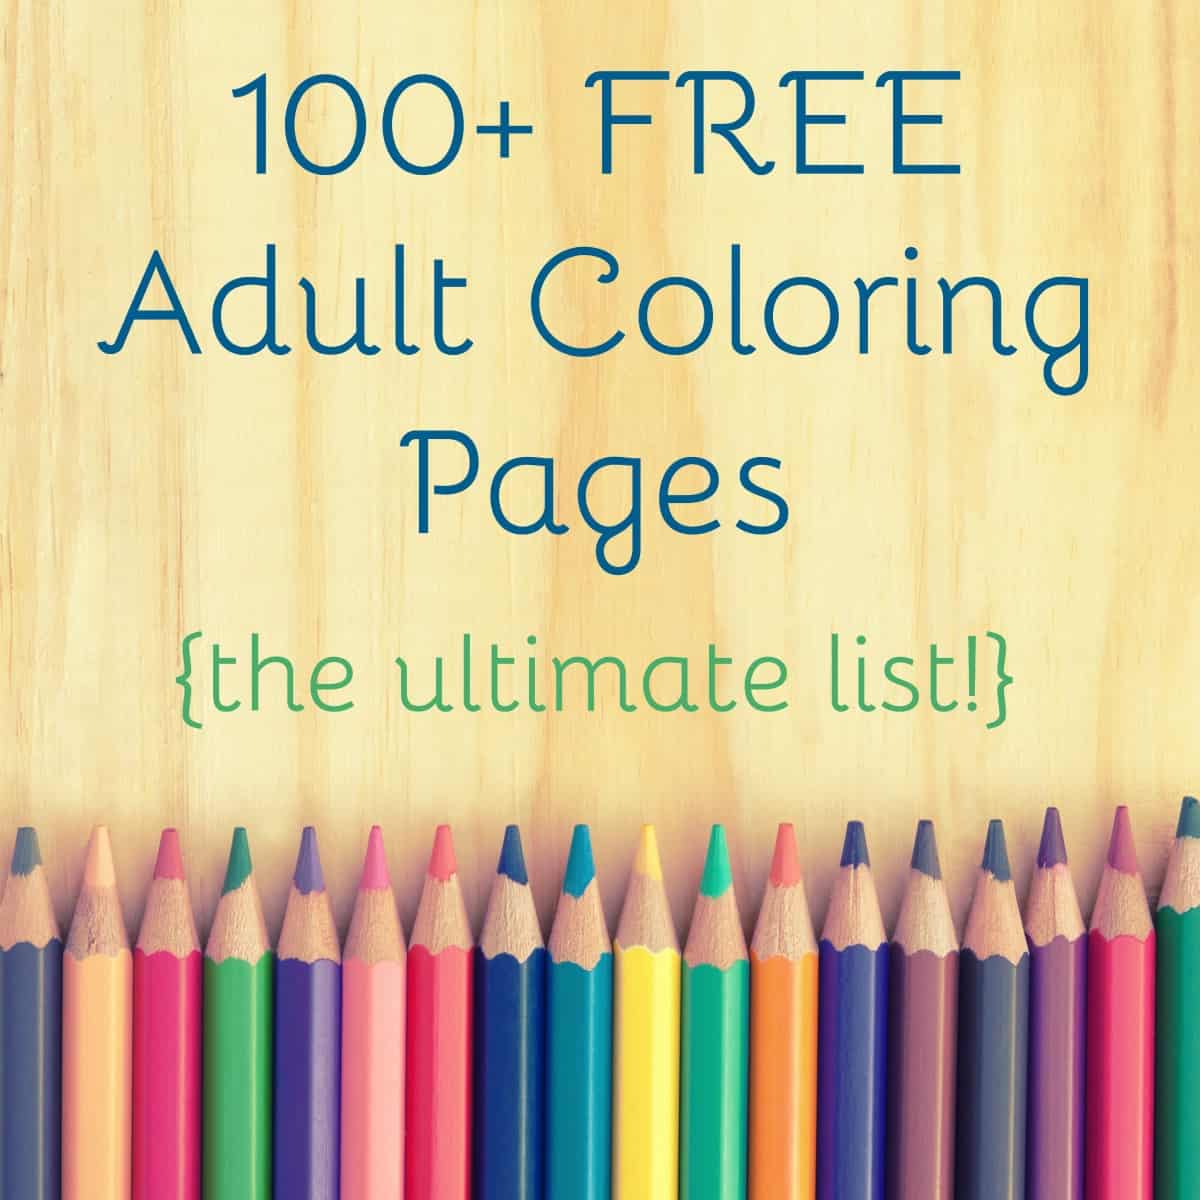 get-links-to-over-100-free-coloring-pages-you-ll-love-these-favorites